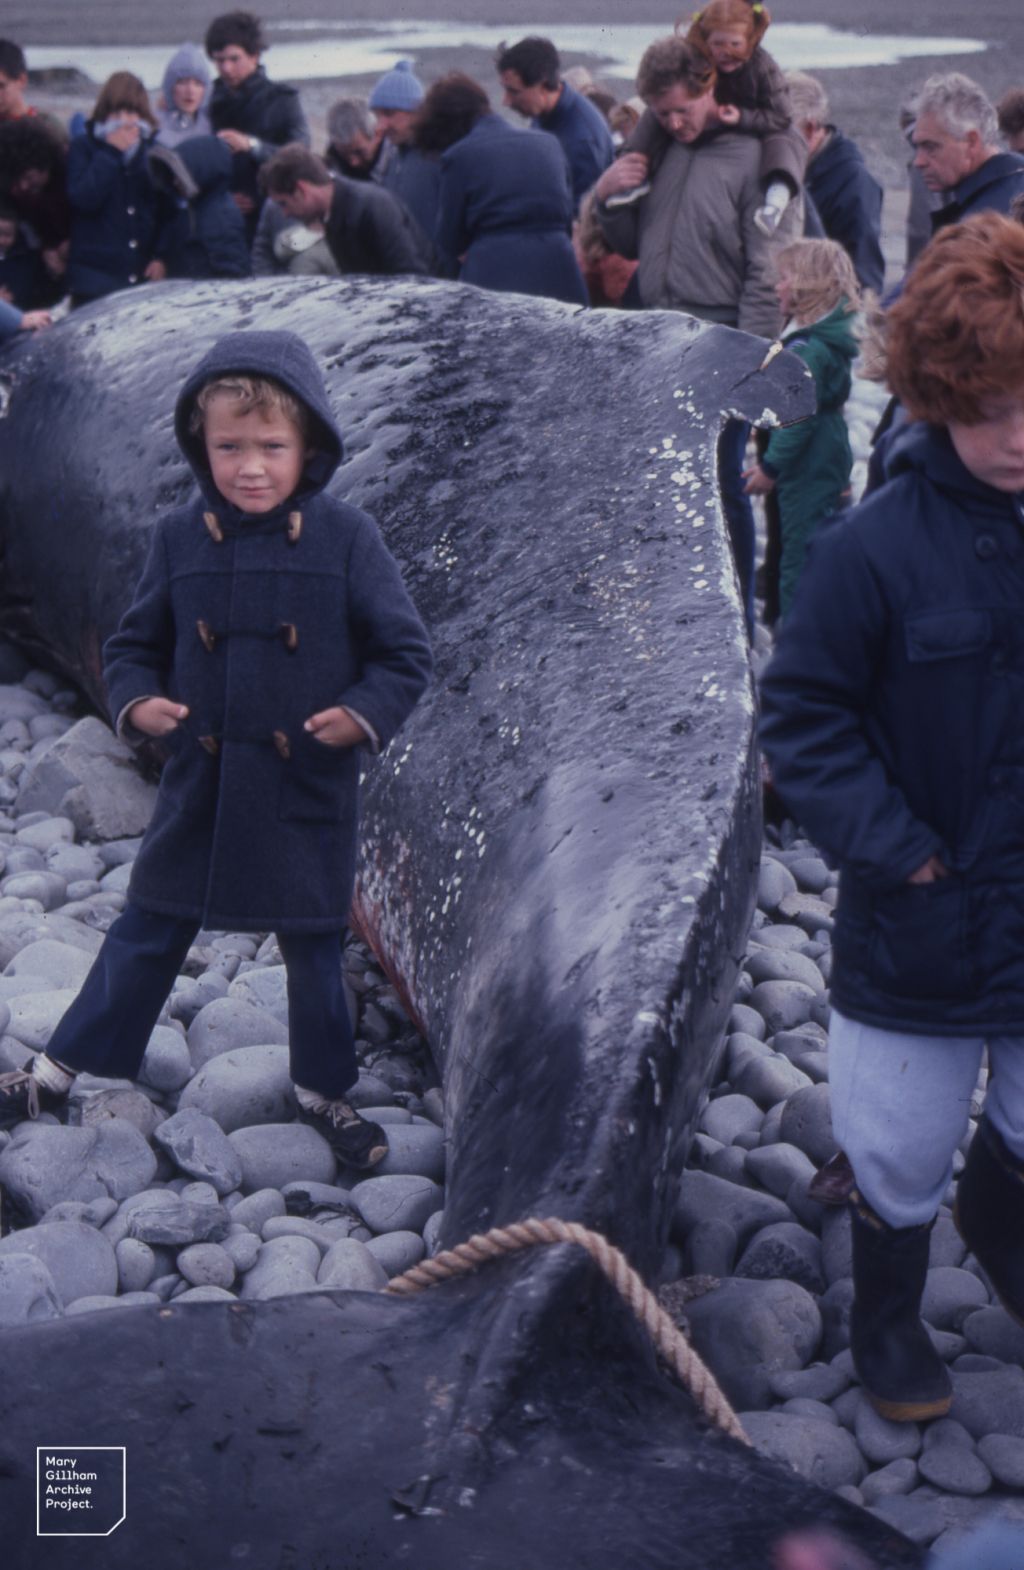 Photo of Humpback Whale stranded on Aberthaw beach in 1982, taken by Mary Gillham